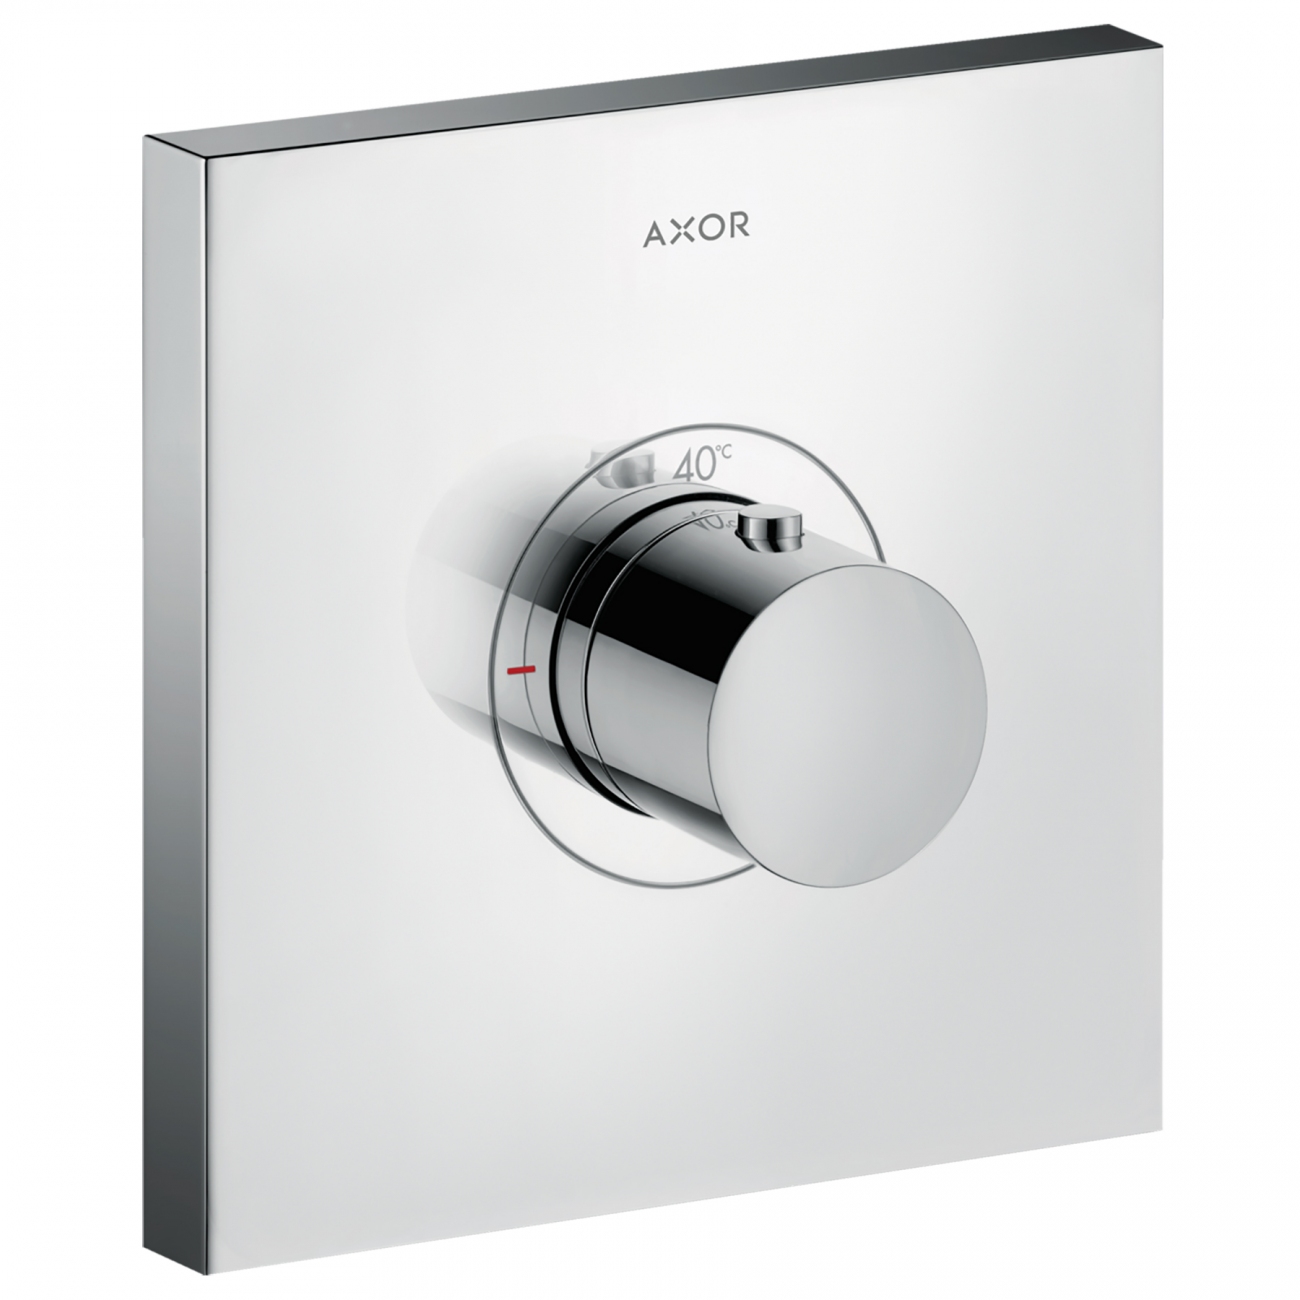 Axor ShowerSelect wall mounted thermostatic